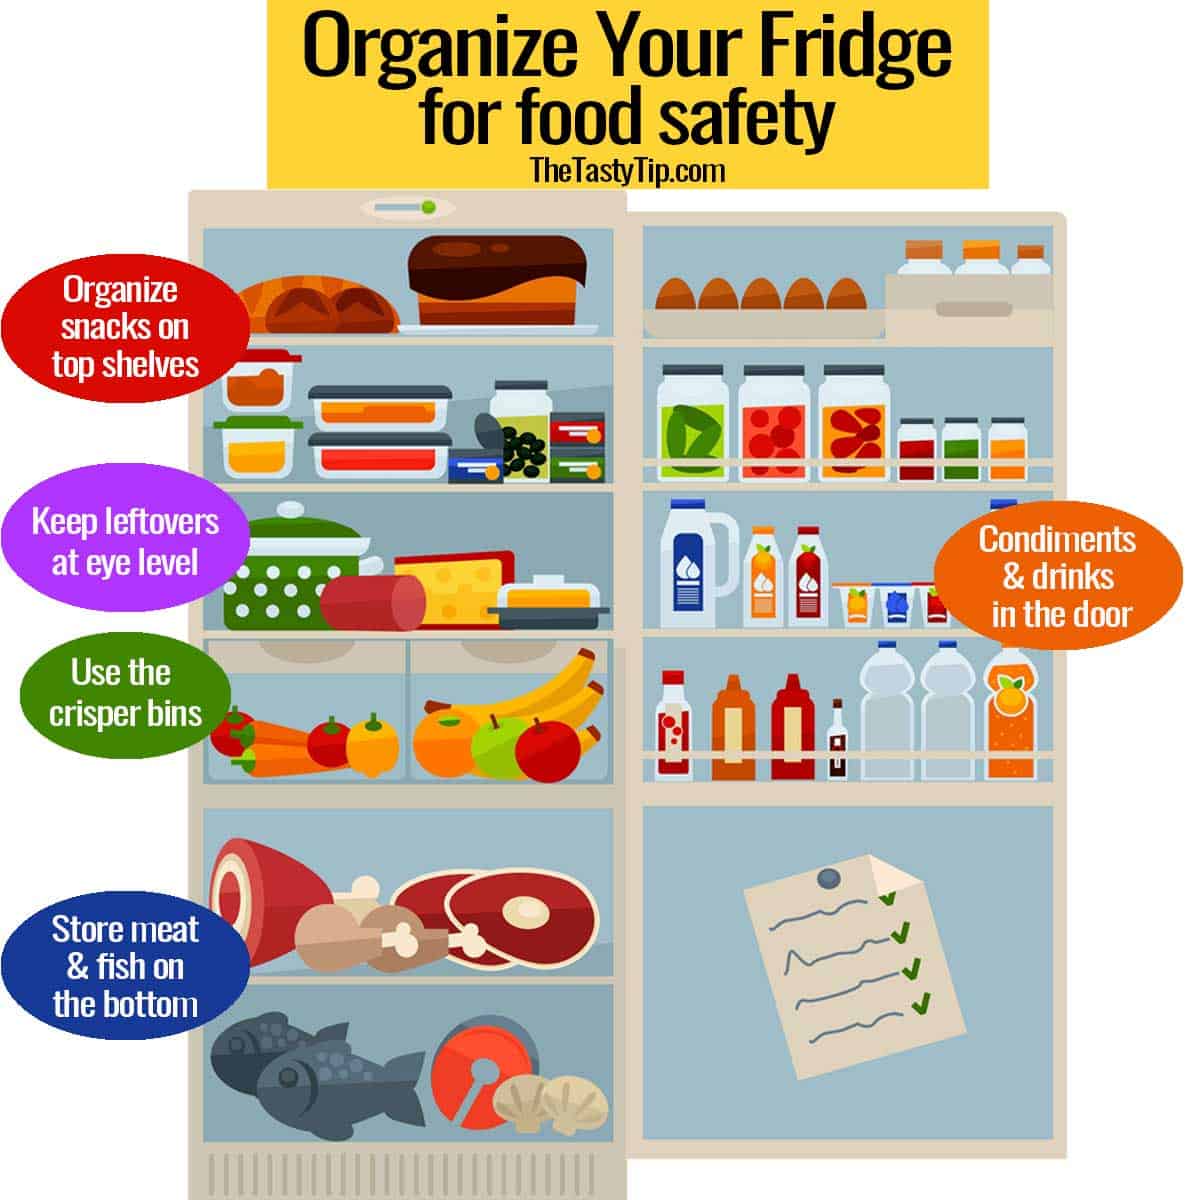 Illustration of an open fridge showing the organization of the fridge based on best food safety practices.